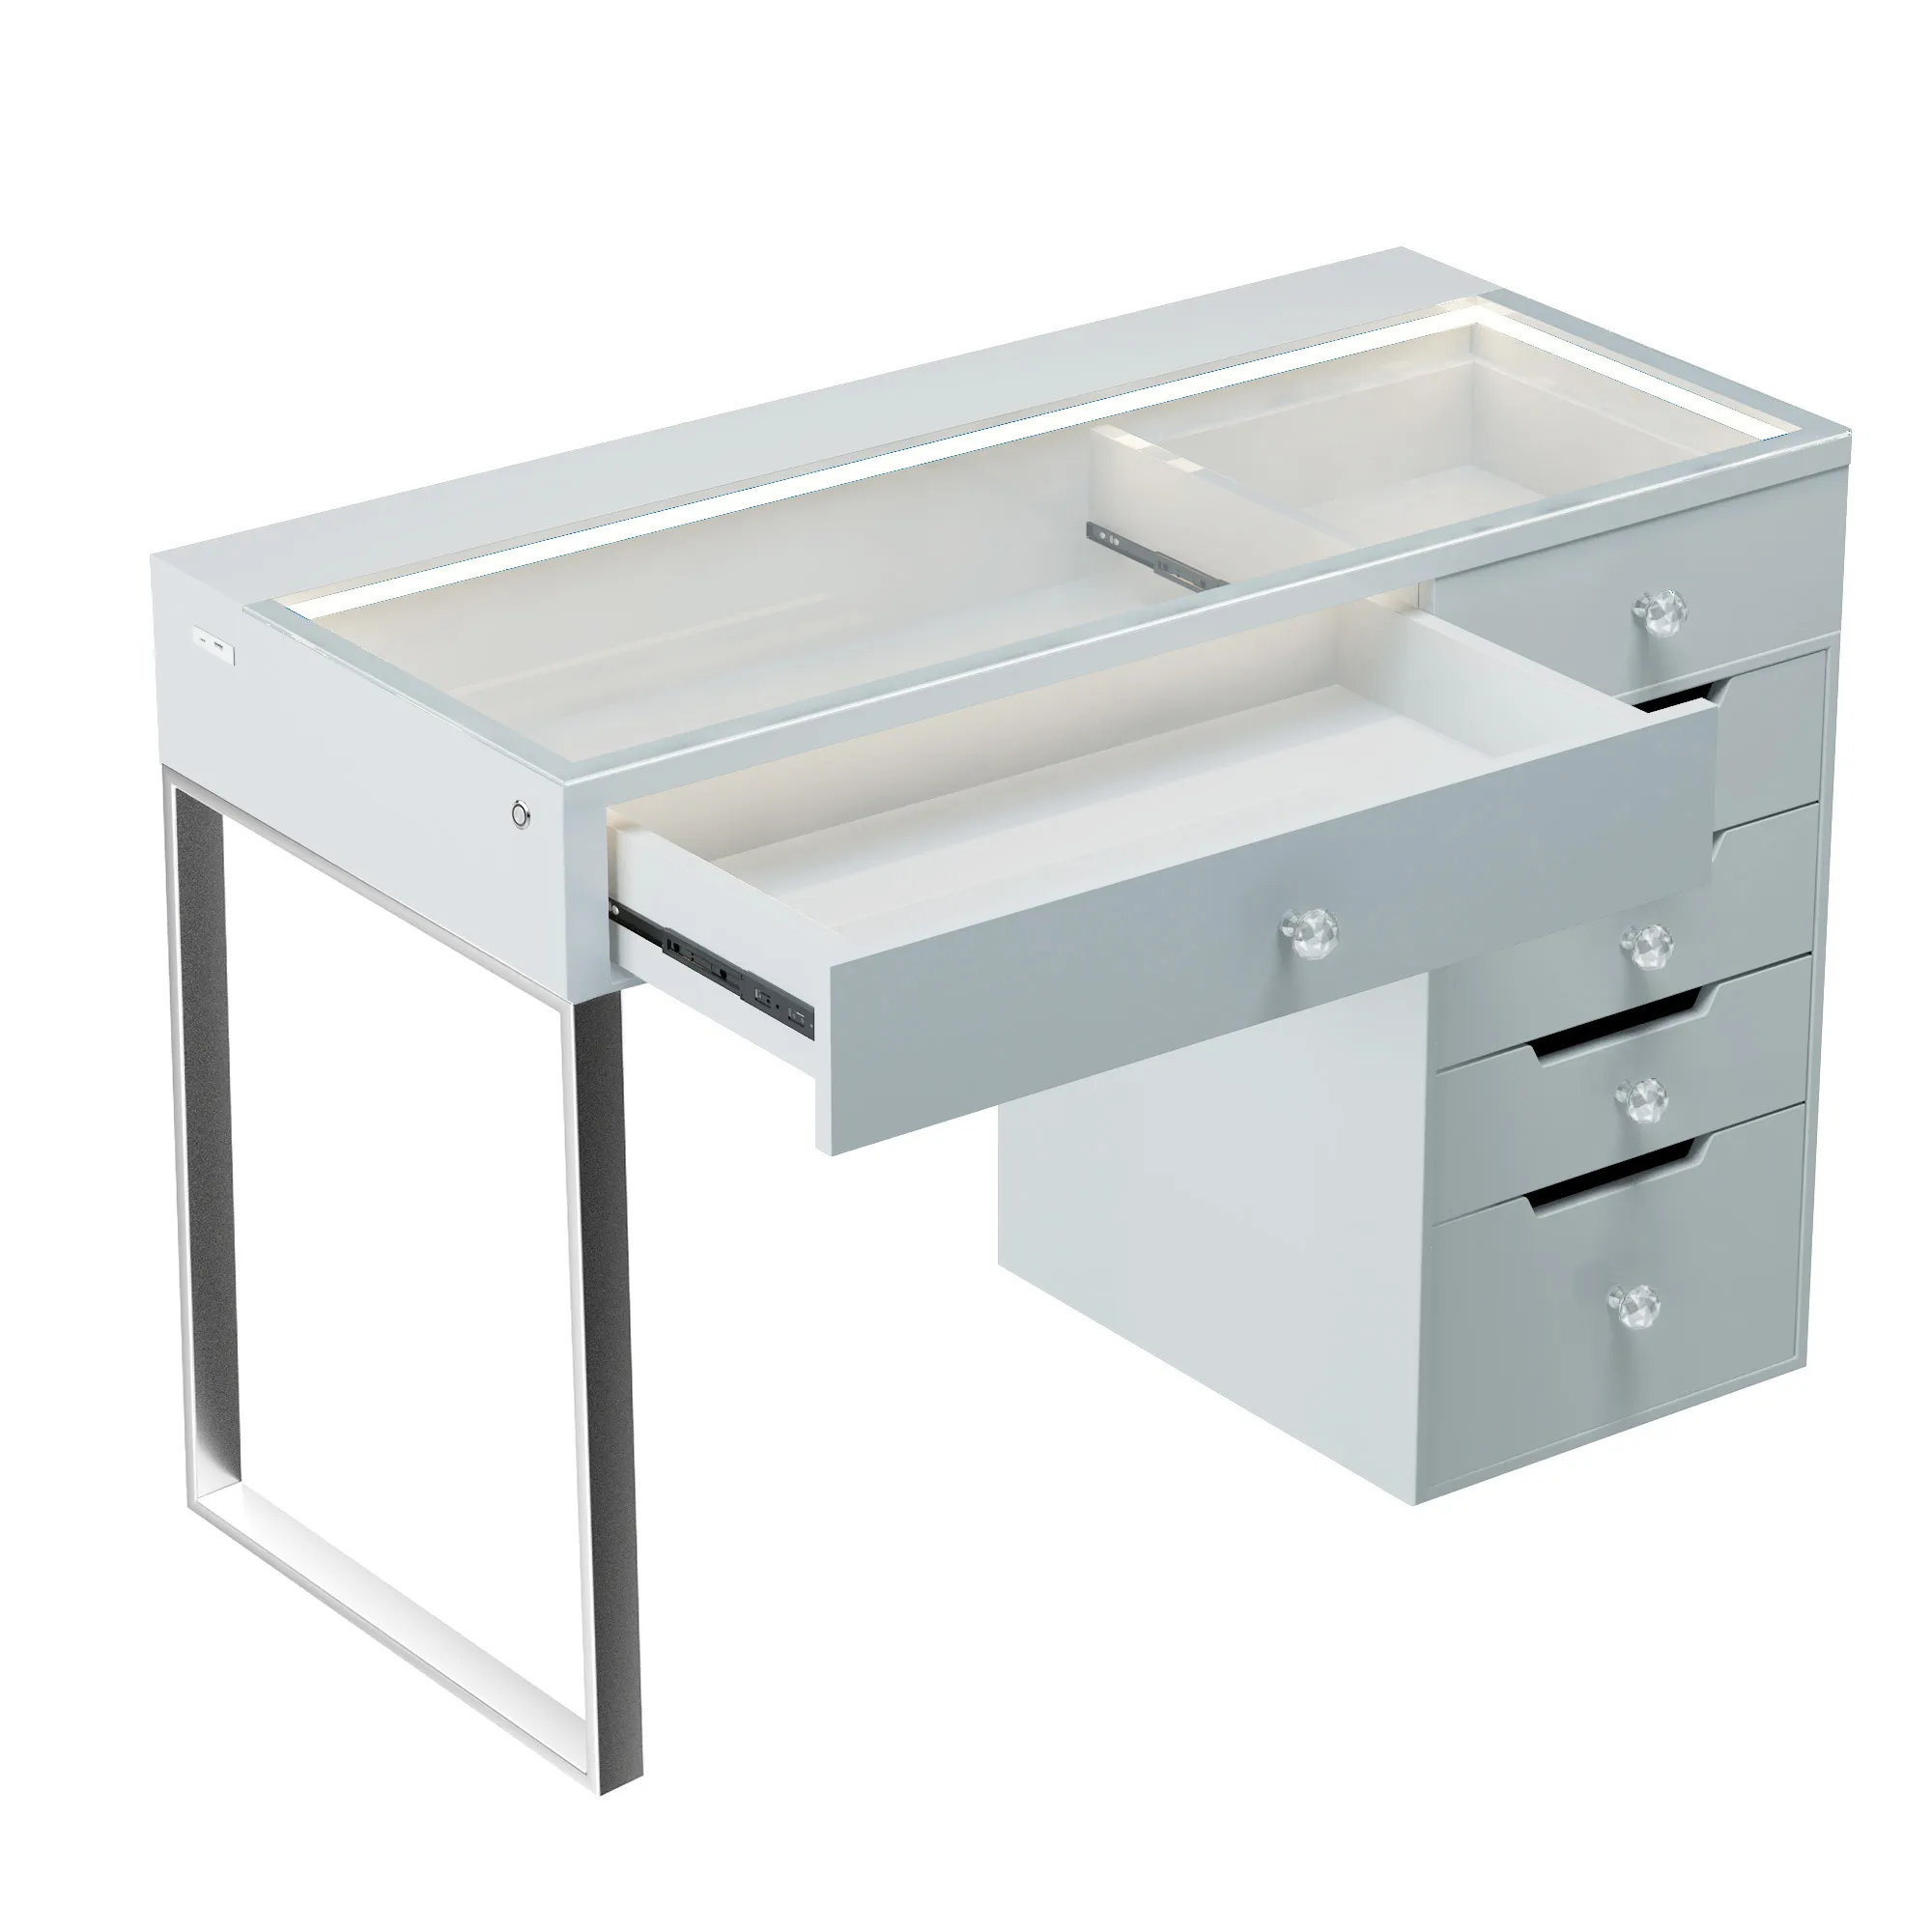 VANITII 6 Drawers Modern Makeup Vanity Desk Dressers With Glass(Installation not included)